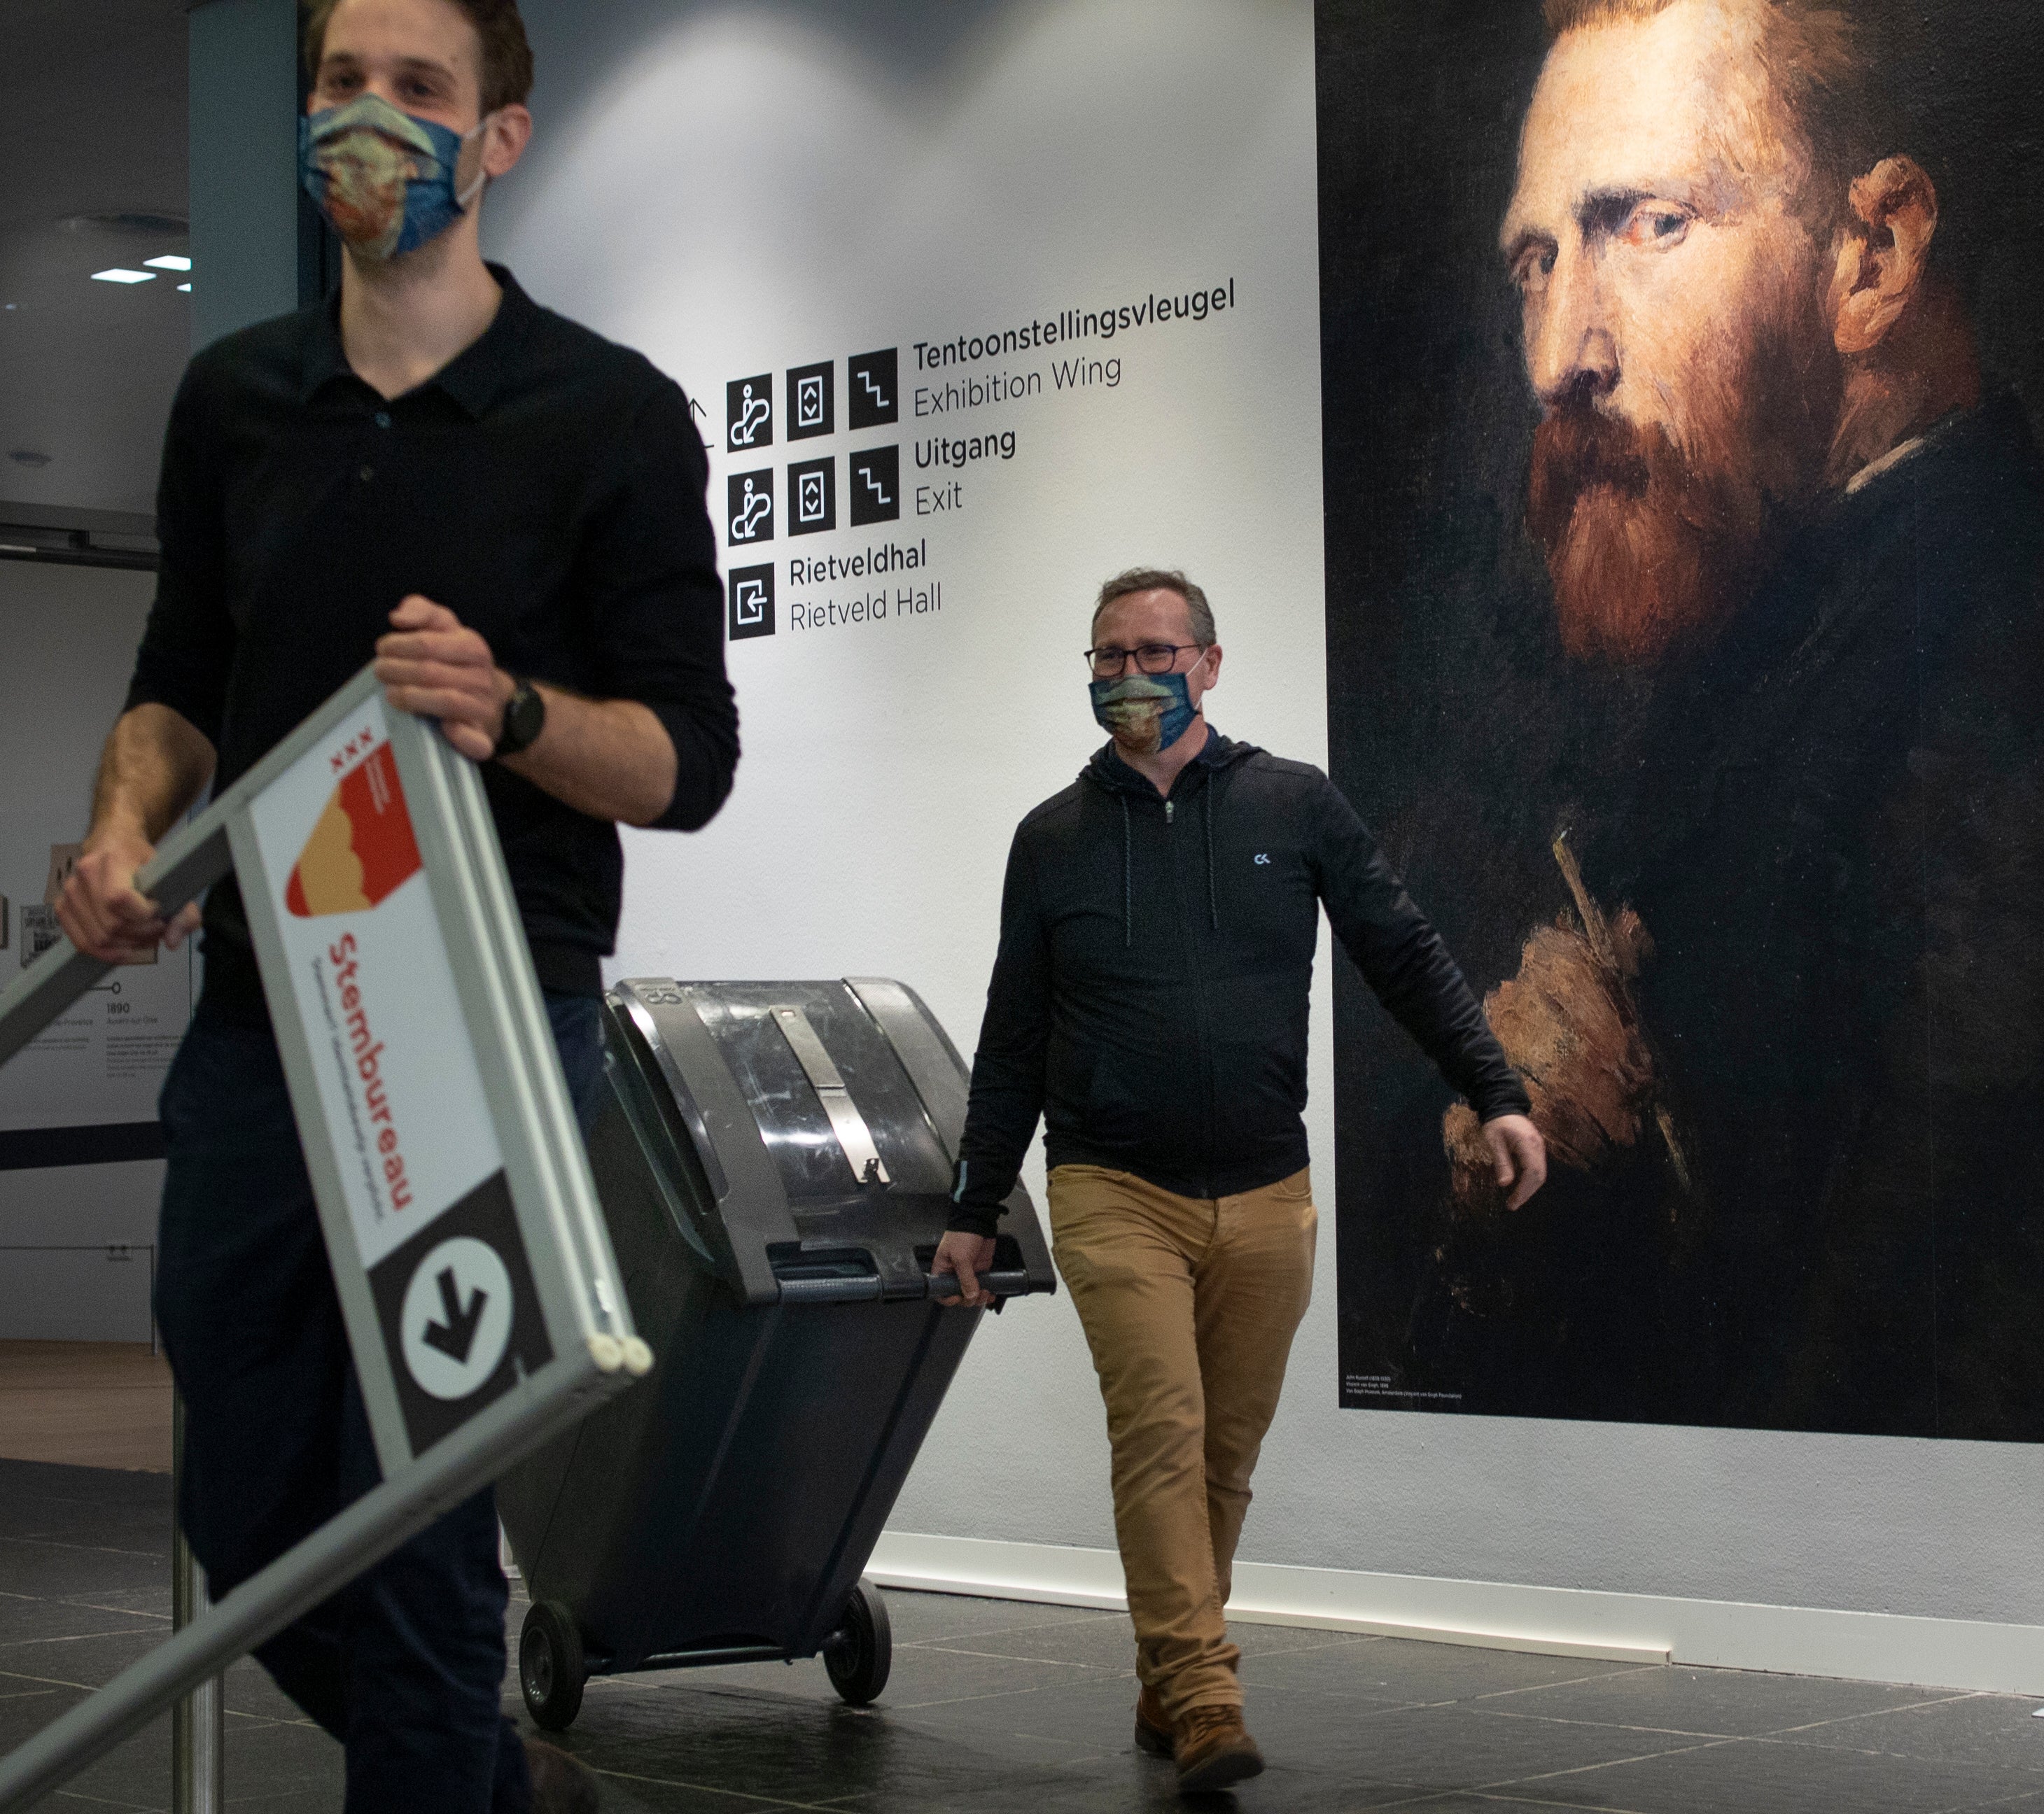 A ballot box is brought to a polling station inside the Van Gogh museum in Amsterdam